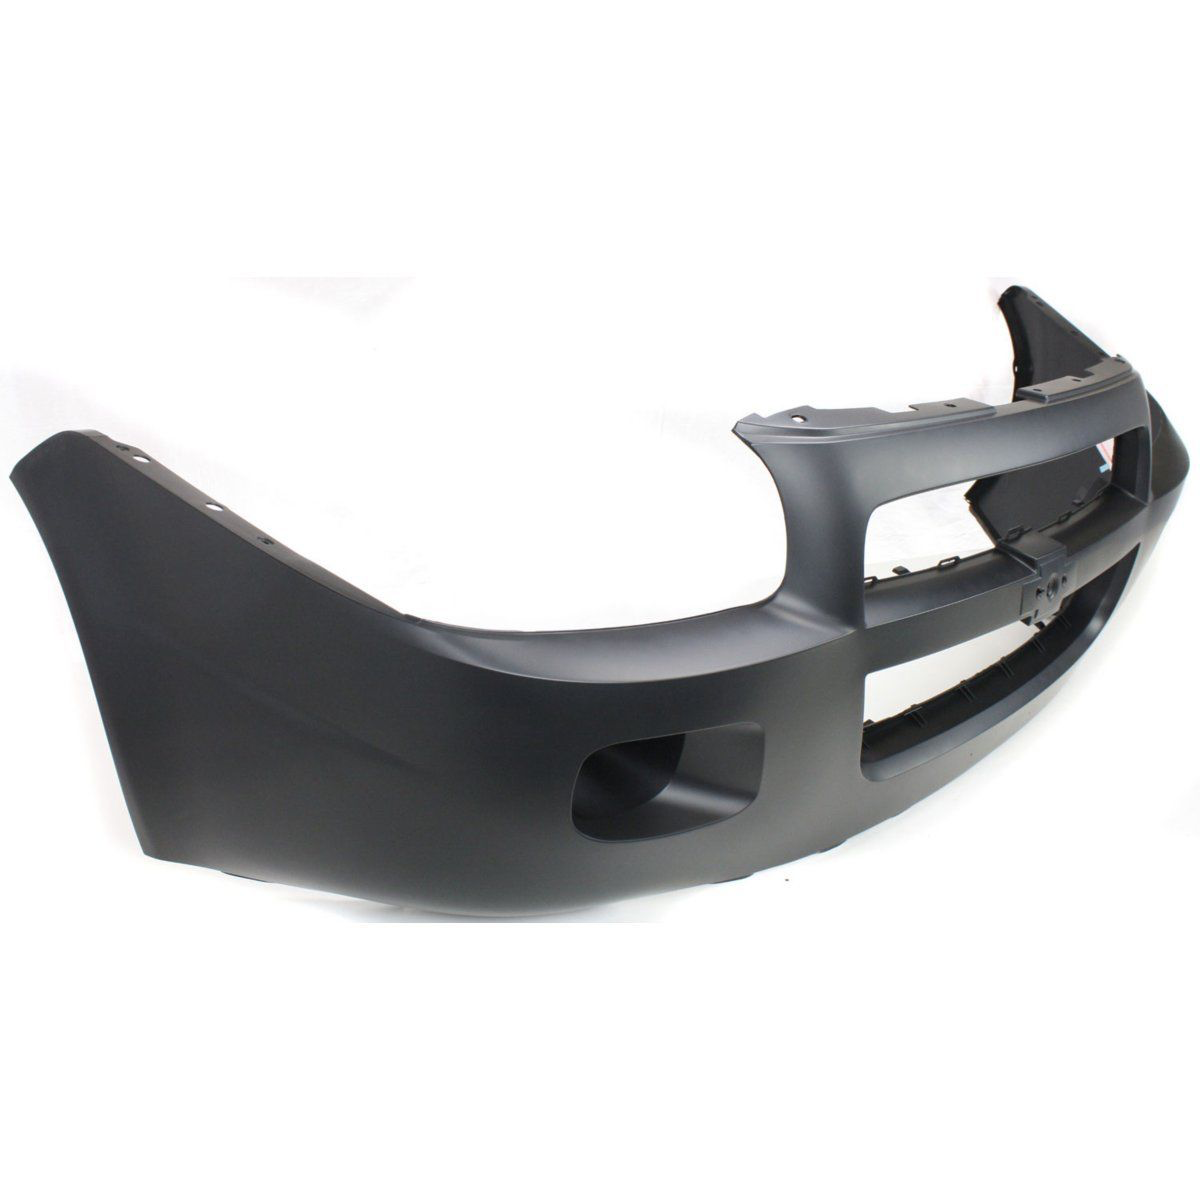 2005-2009 CHEVY UPLANDER Front Bumper Cover w/121 Painted to Match